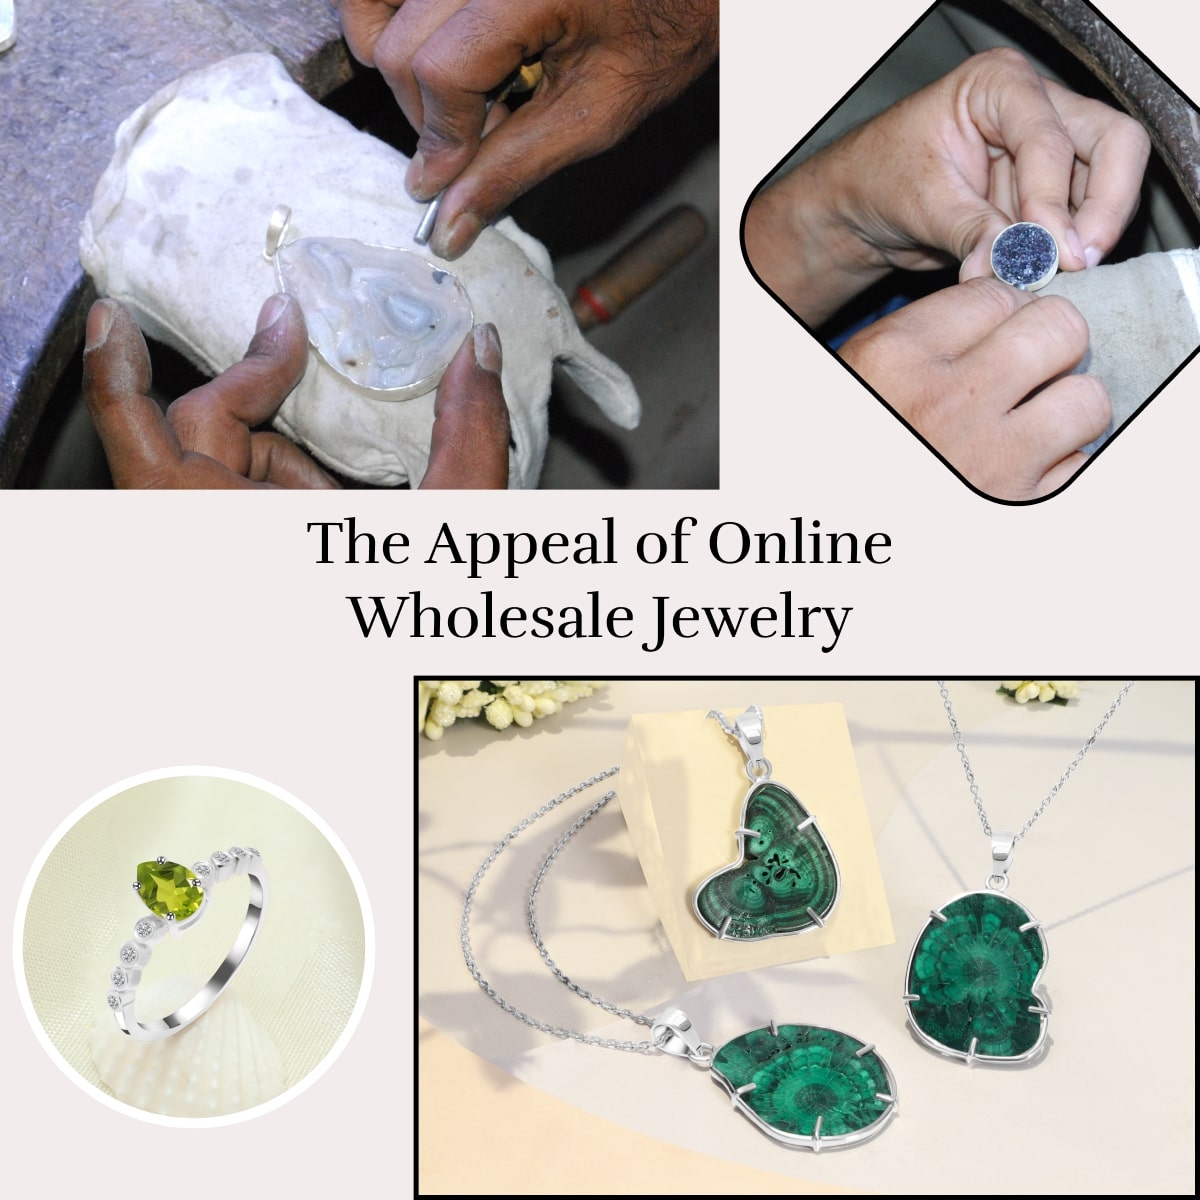 Reasons for Making an Investment in An Online Wholesale Jewelry Platform?